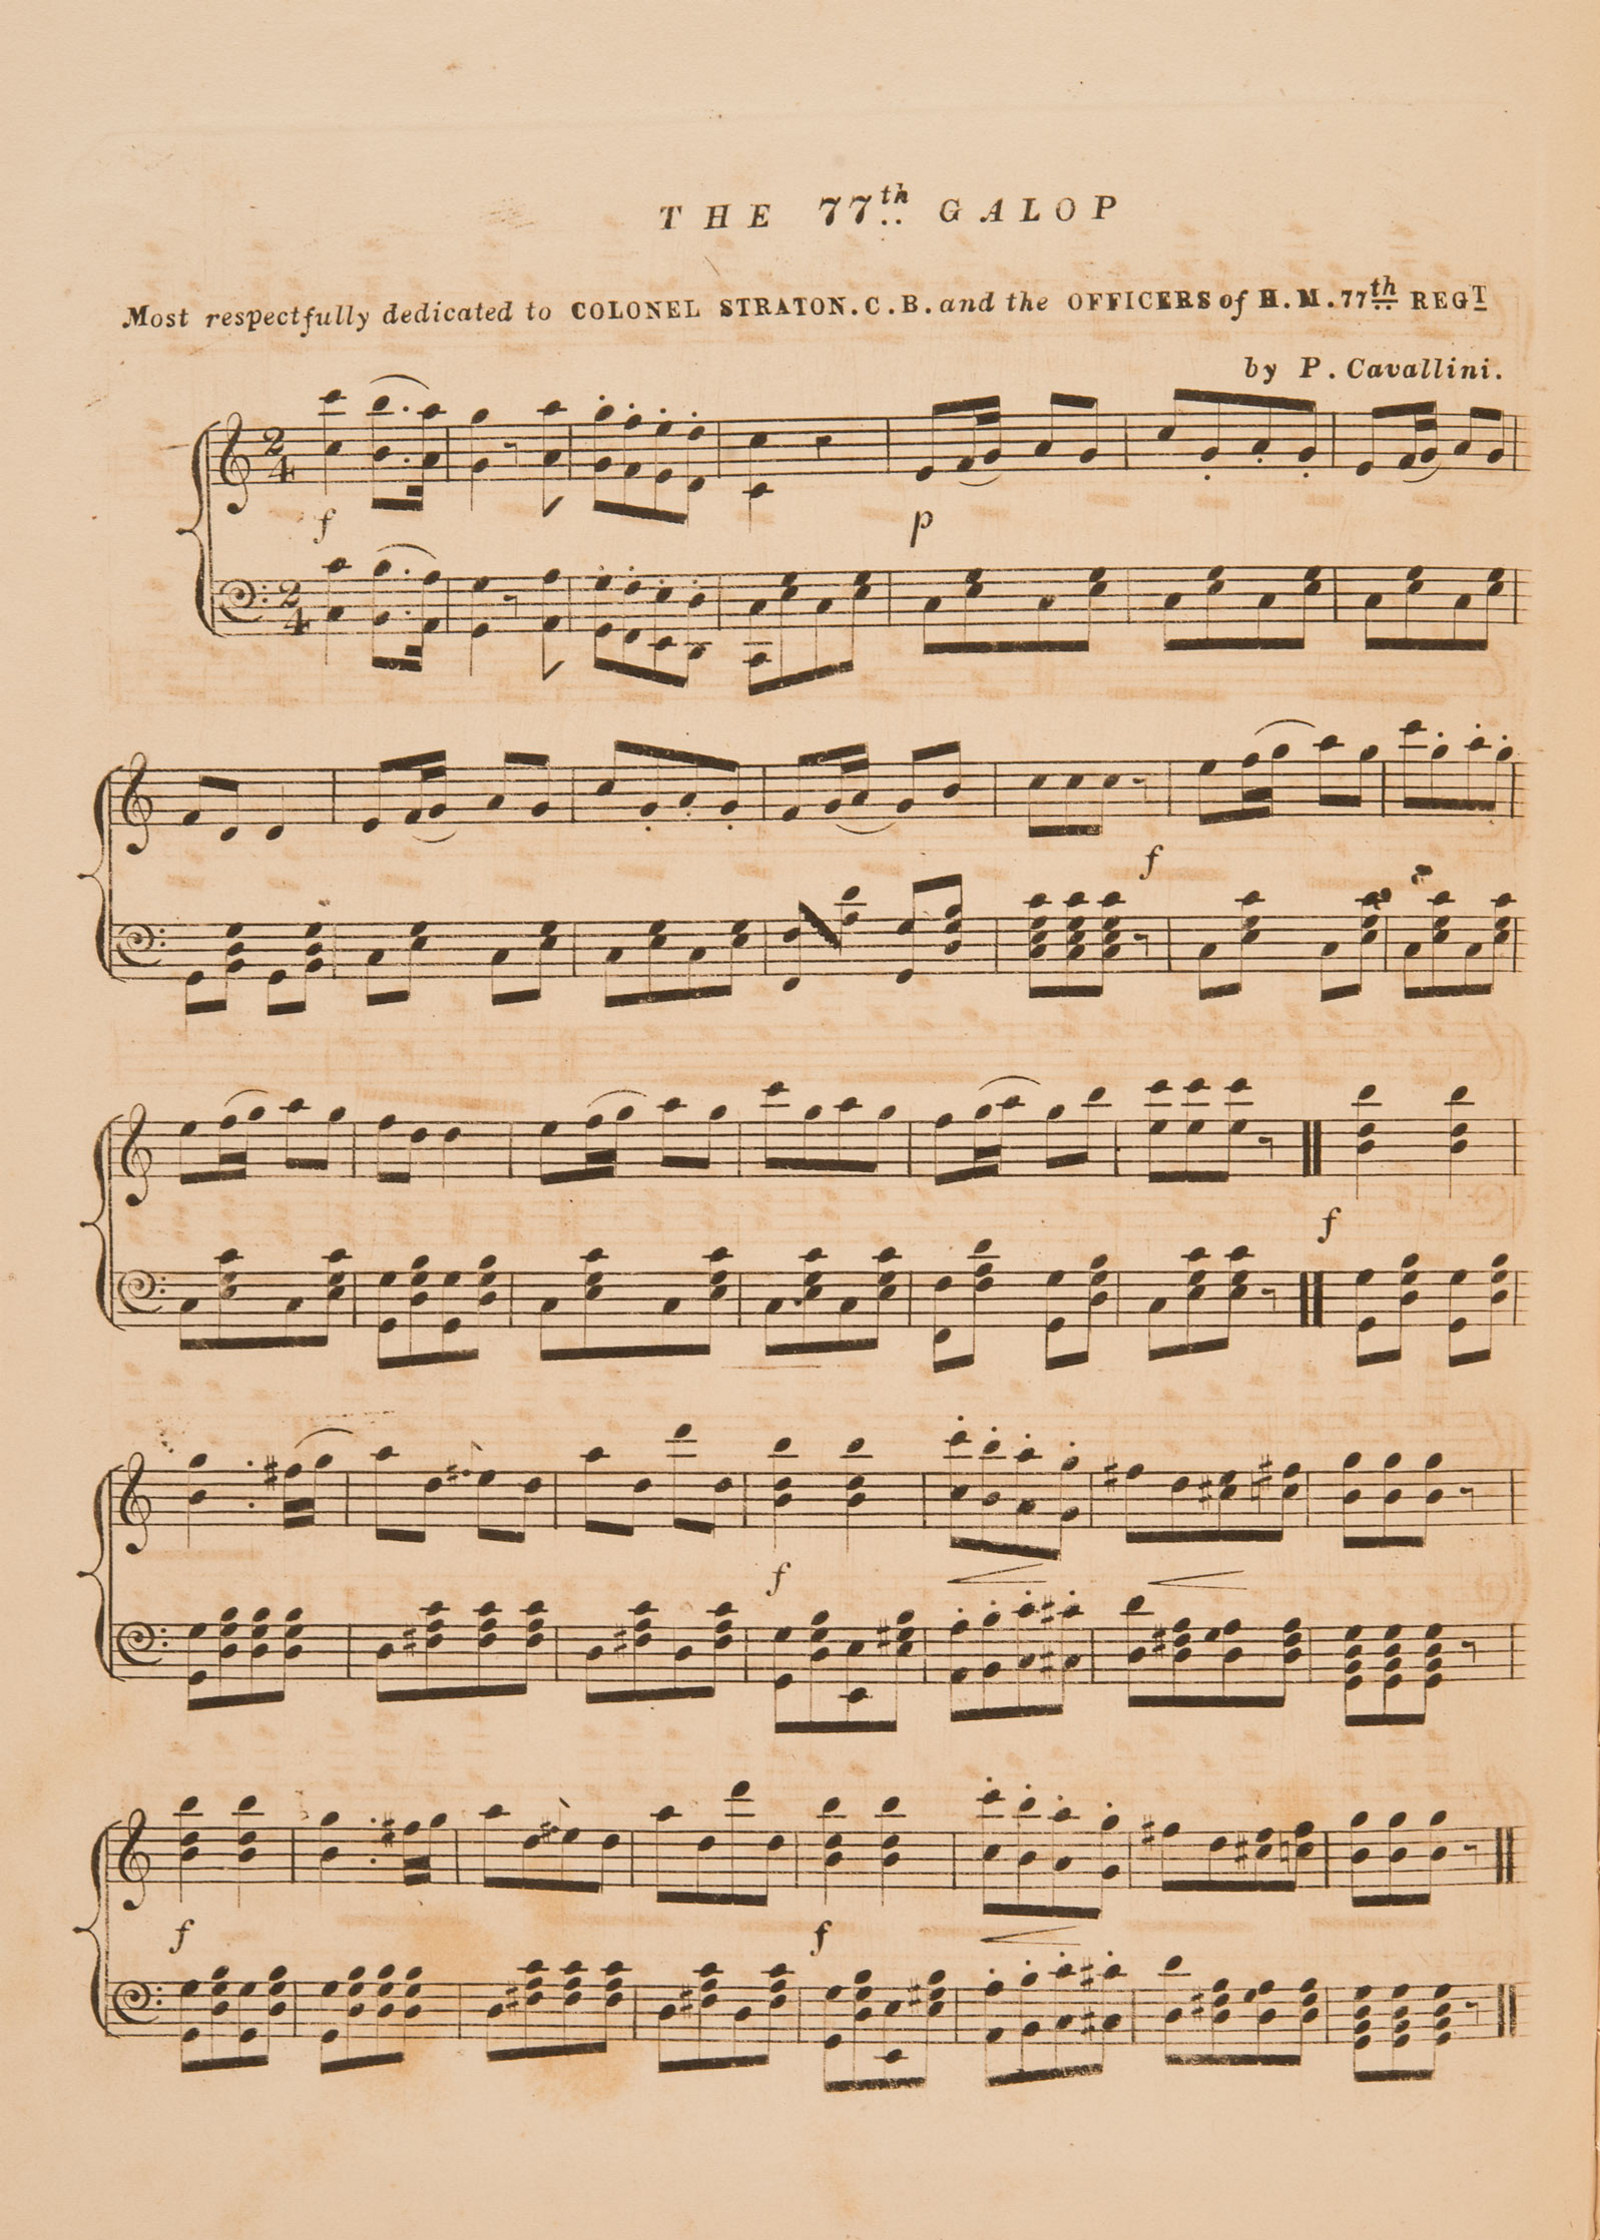 Sheet music, 'The 77th Galop', by P. Cavallini, page 1, published 1858